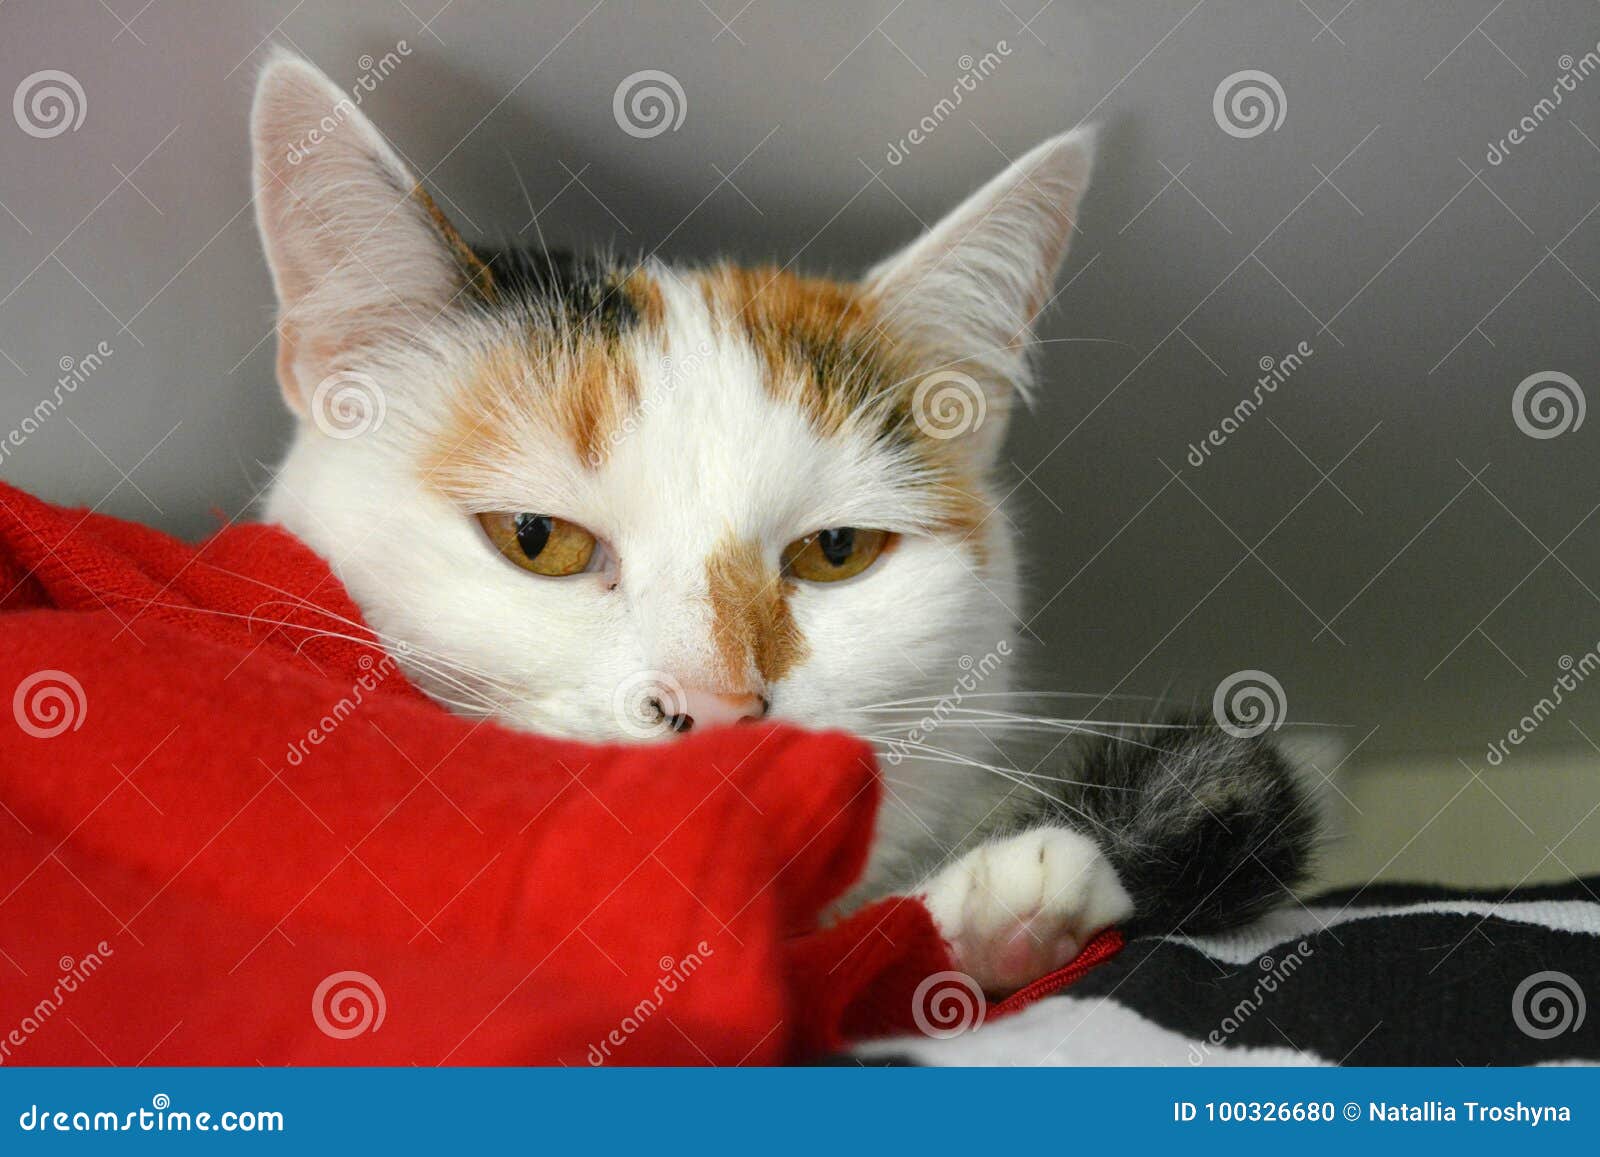  Cat  in the closet  stock photo Image of carnivoran snout 